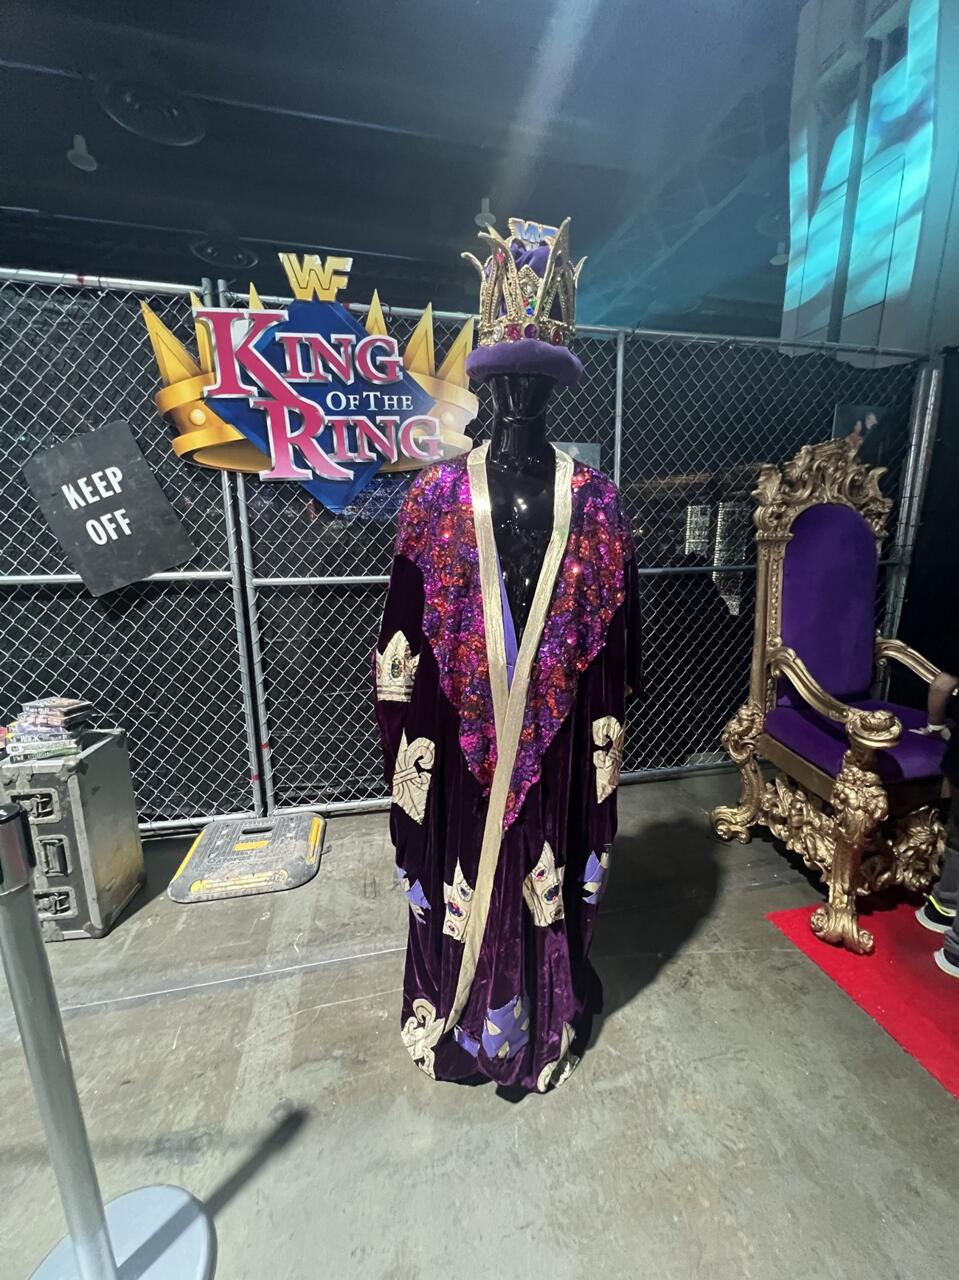 King of the Ring crown and robe